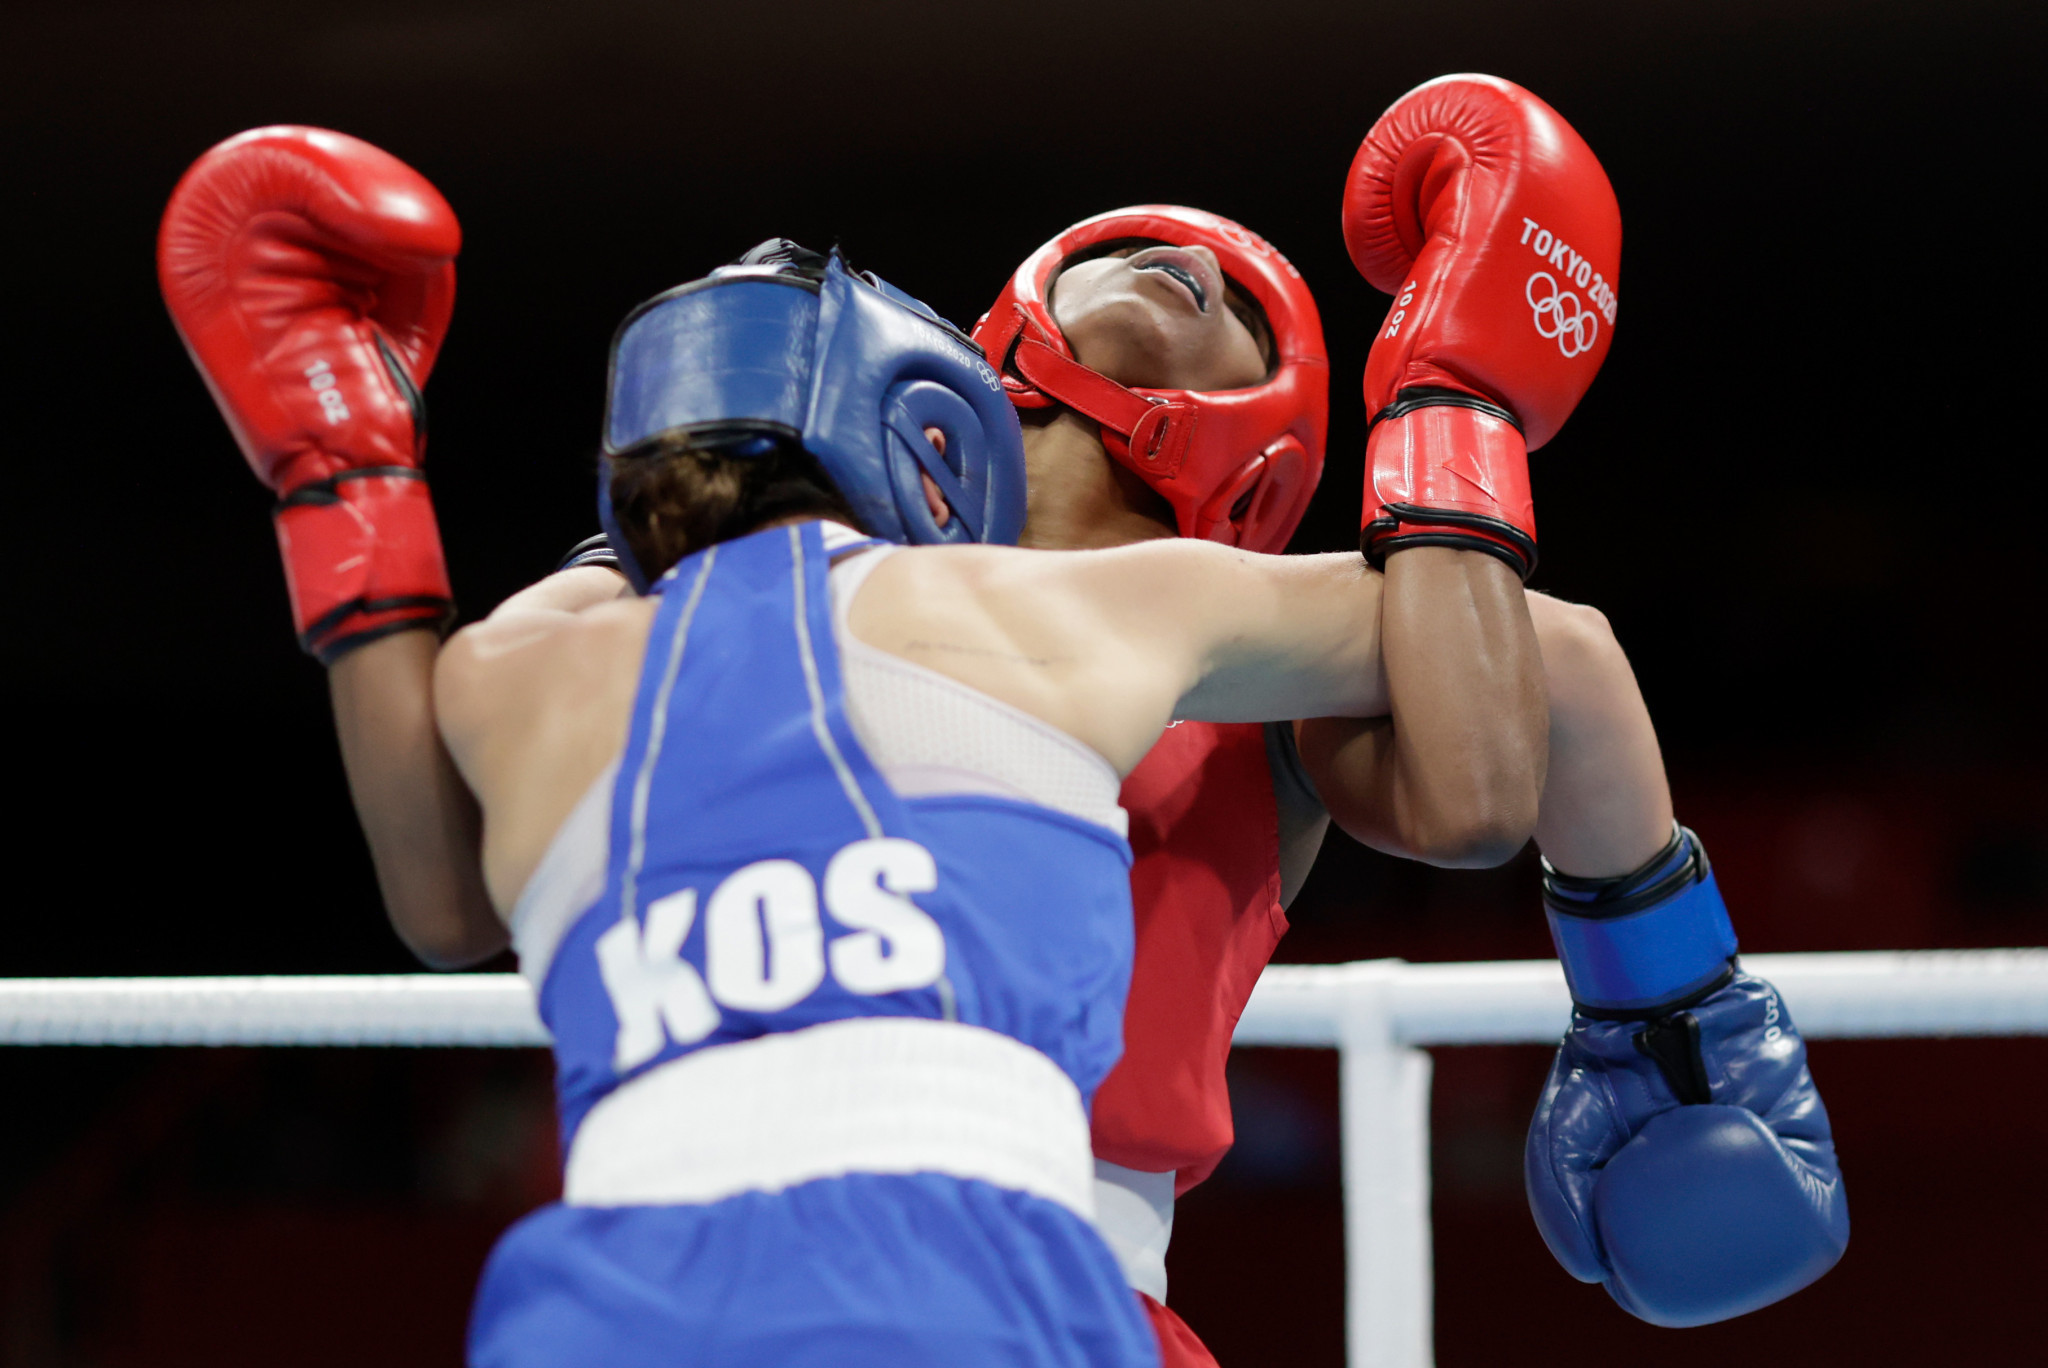 Kosovo miss out on third consecutive IBA Men's World Boxing Championships due to visa issues